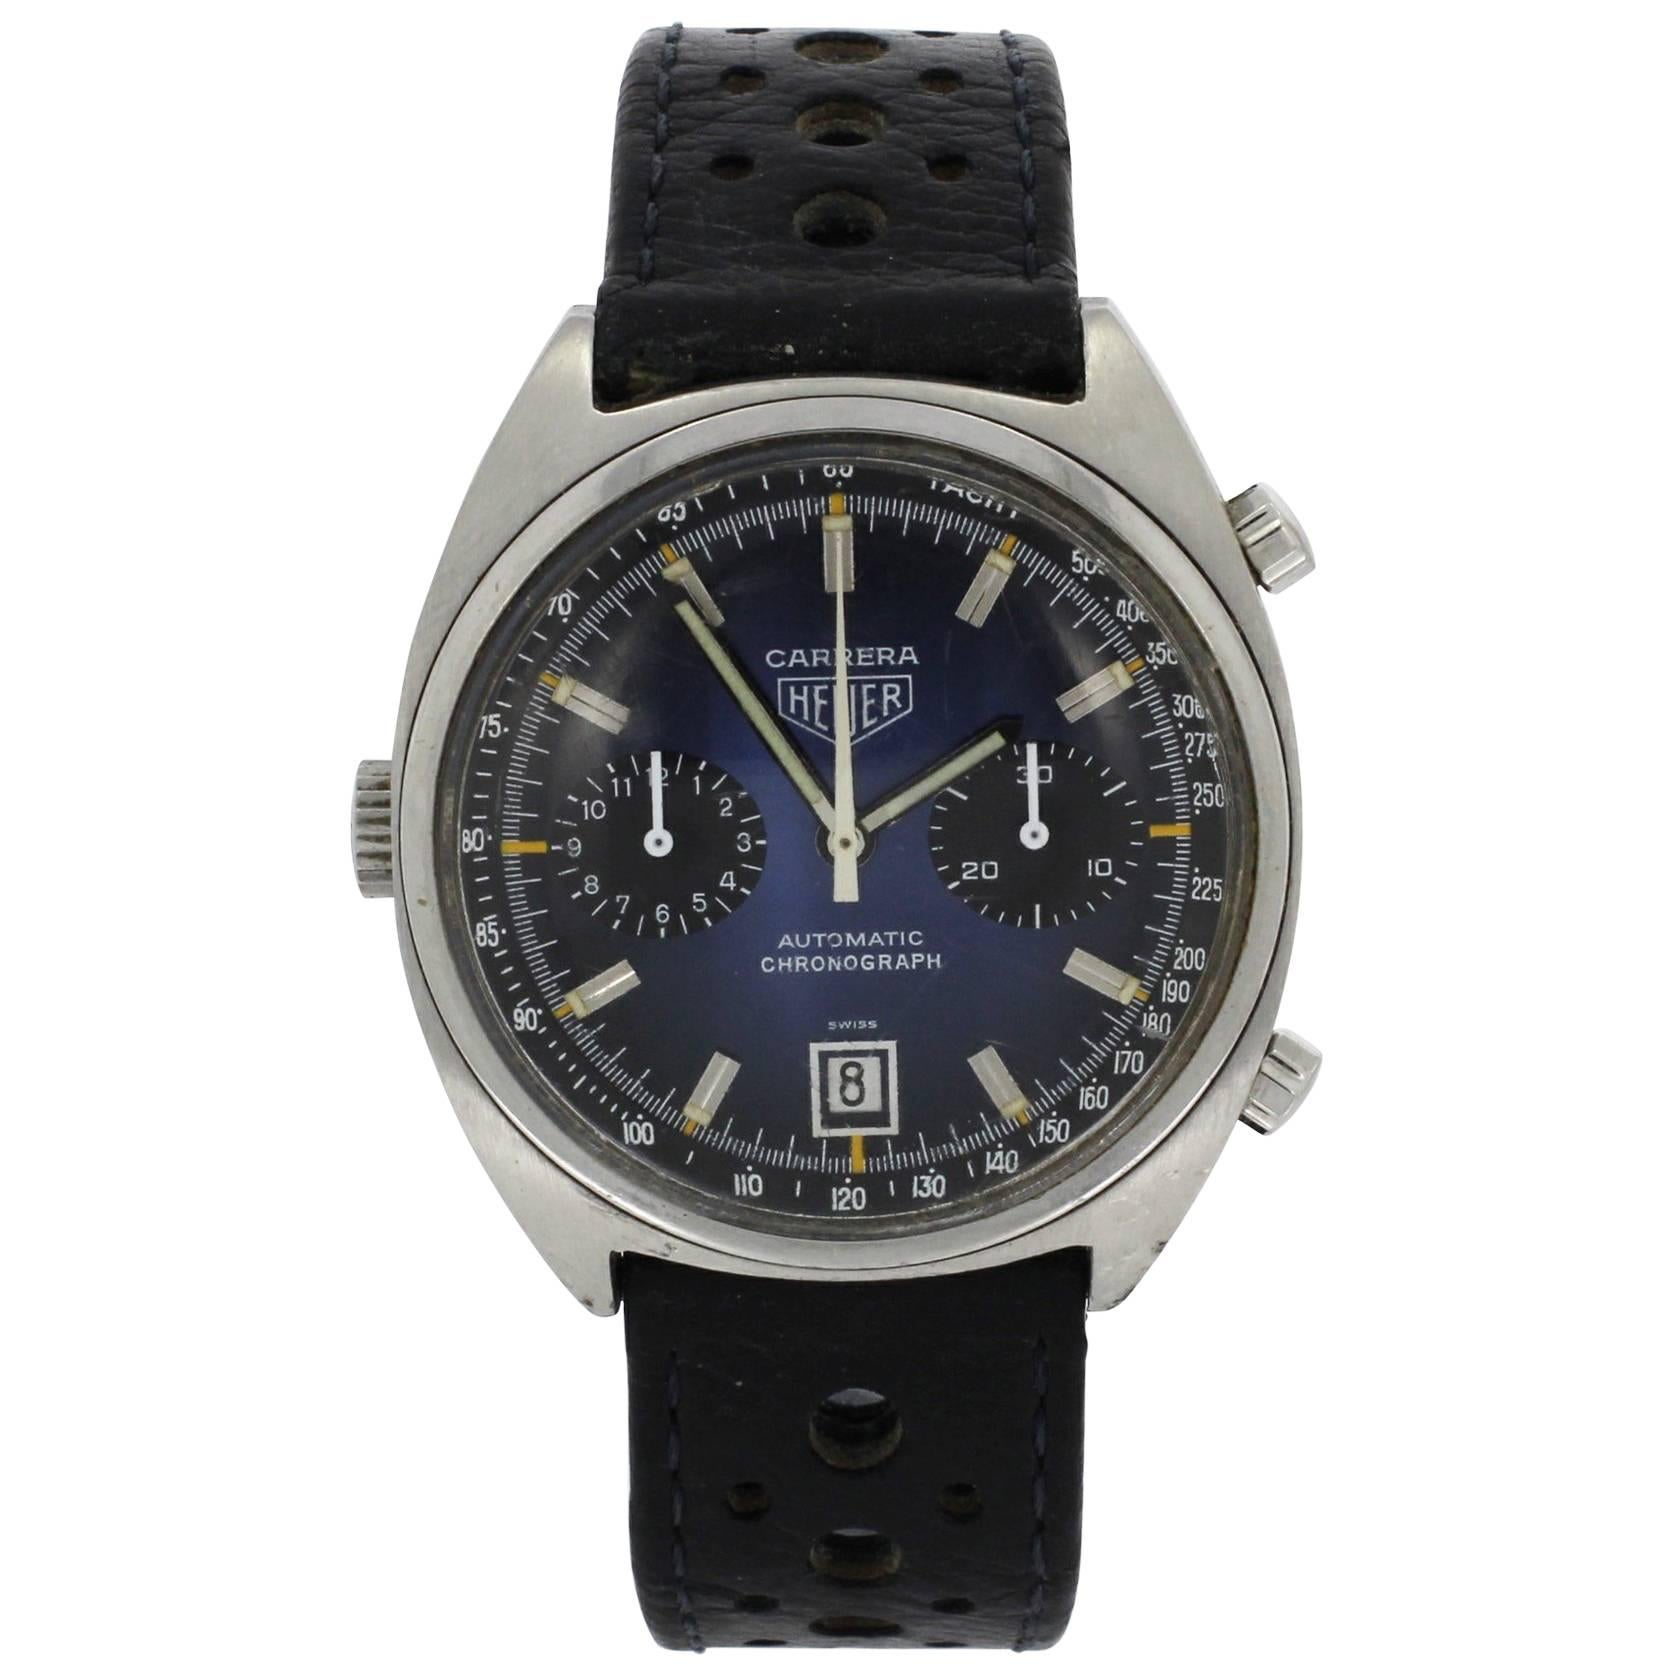 Heuer Carrera Stainless Steel Chronograph Wristwatch Ref 110.253 For Sale